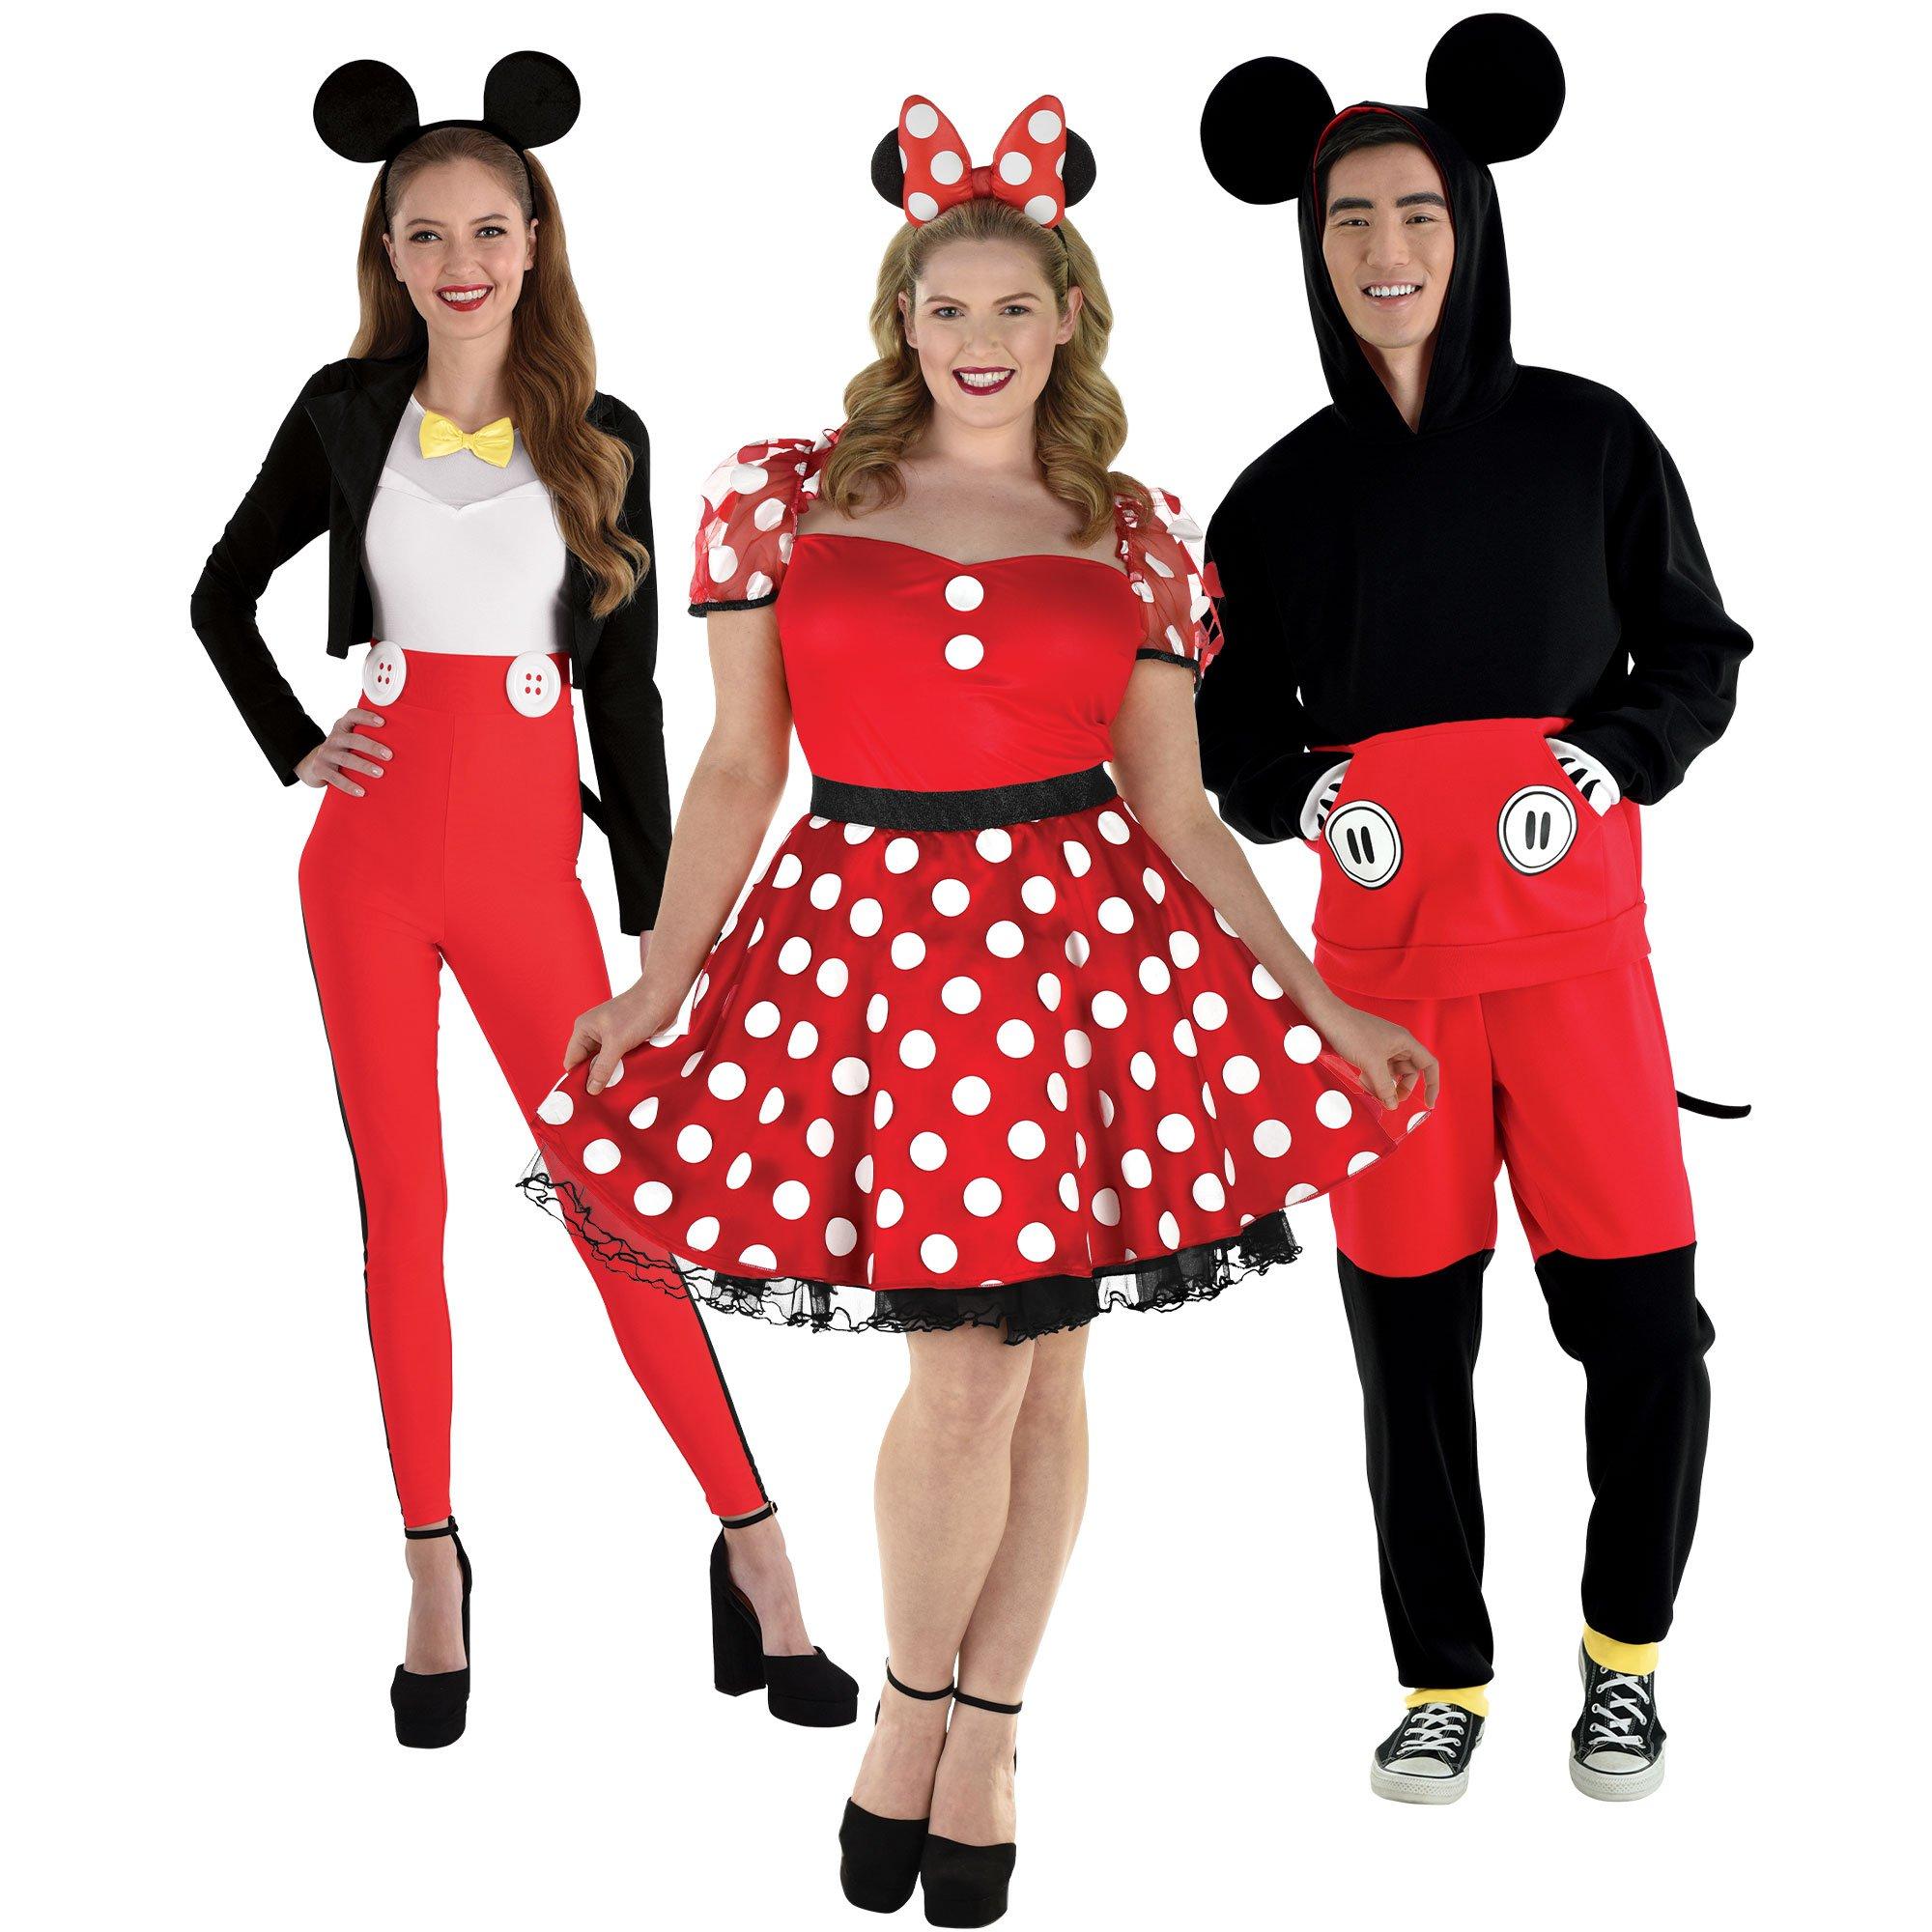 Mickey Mouse Costume Kit - Mickey and Friends 